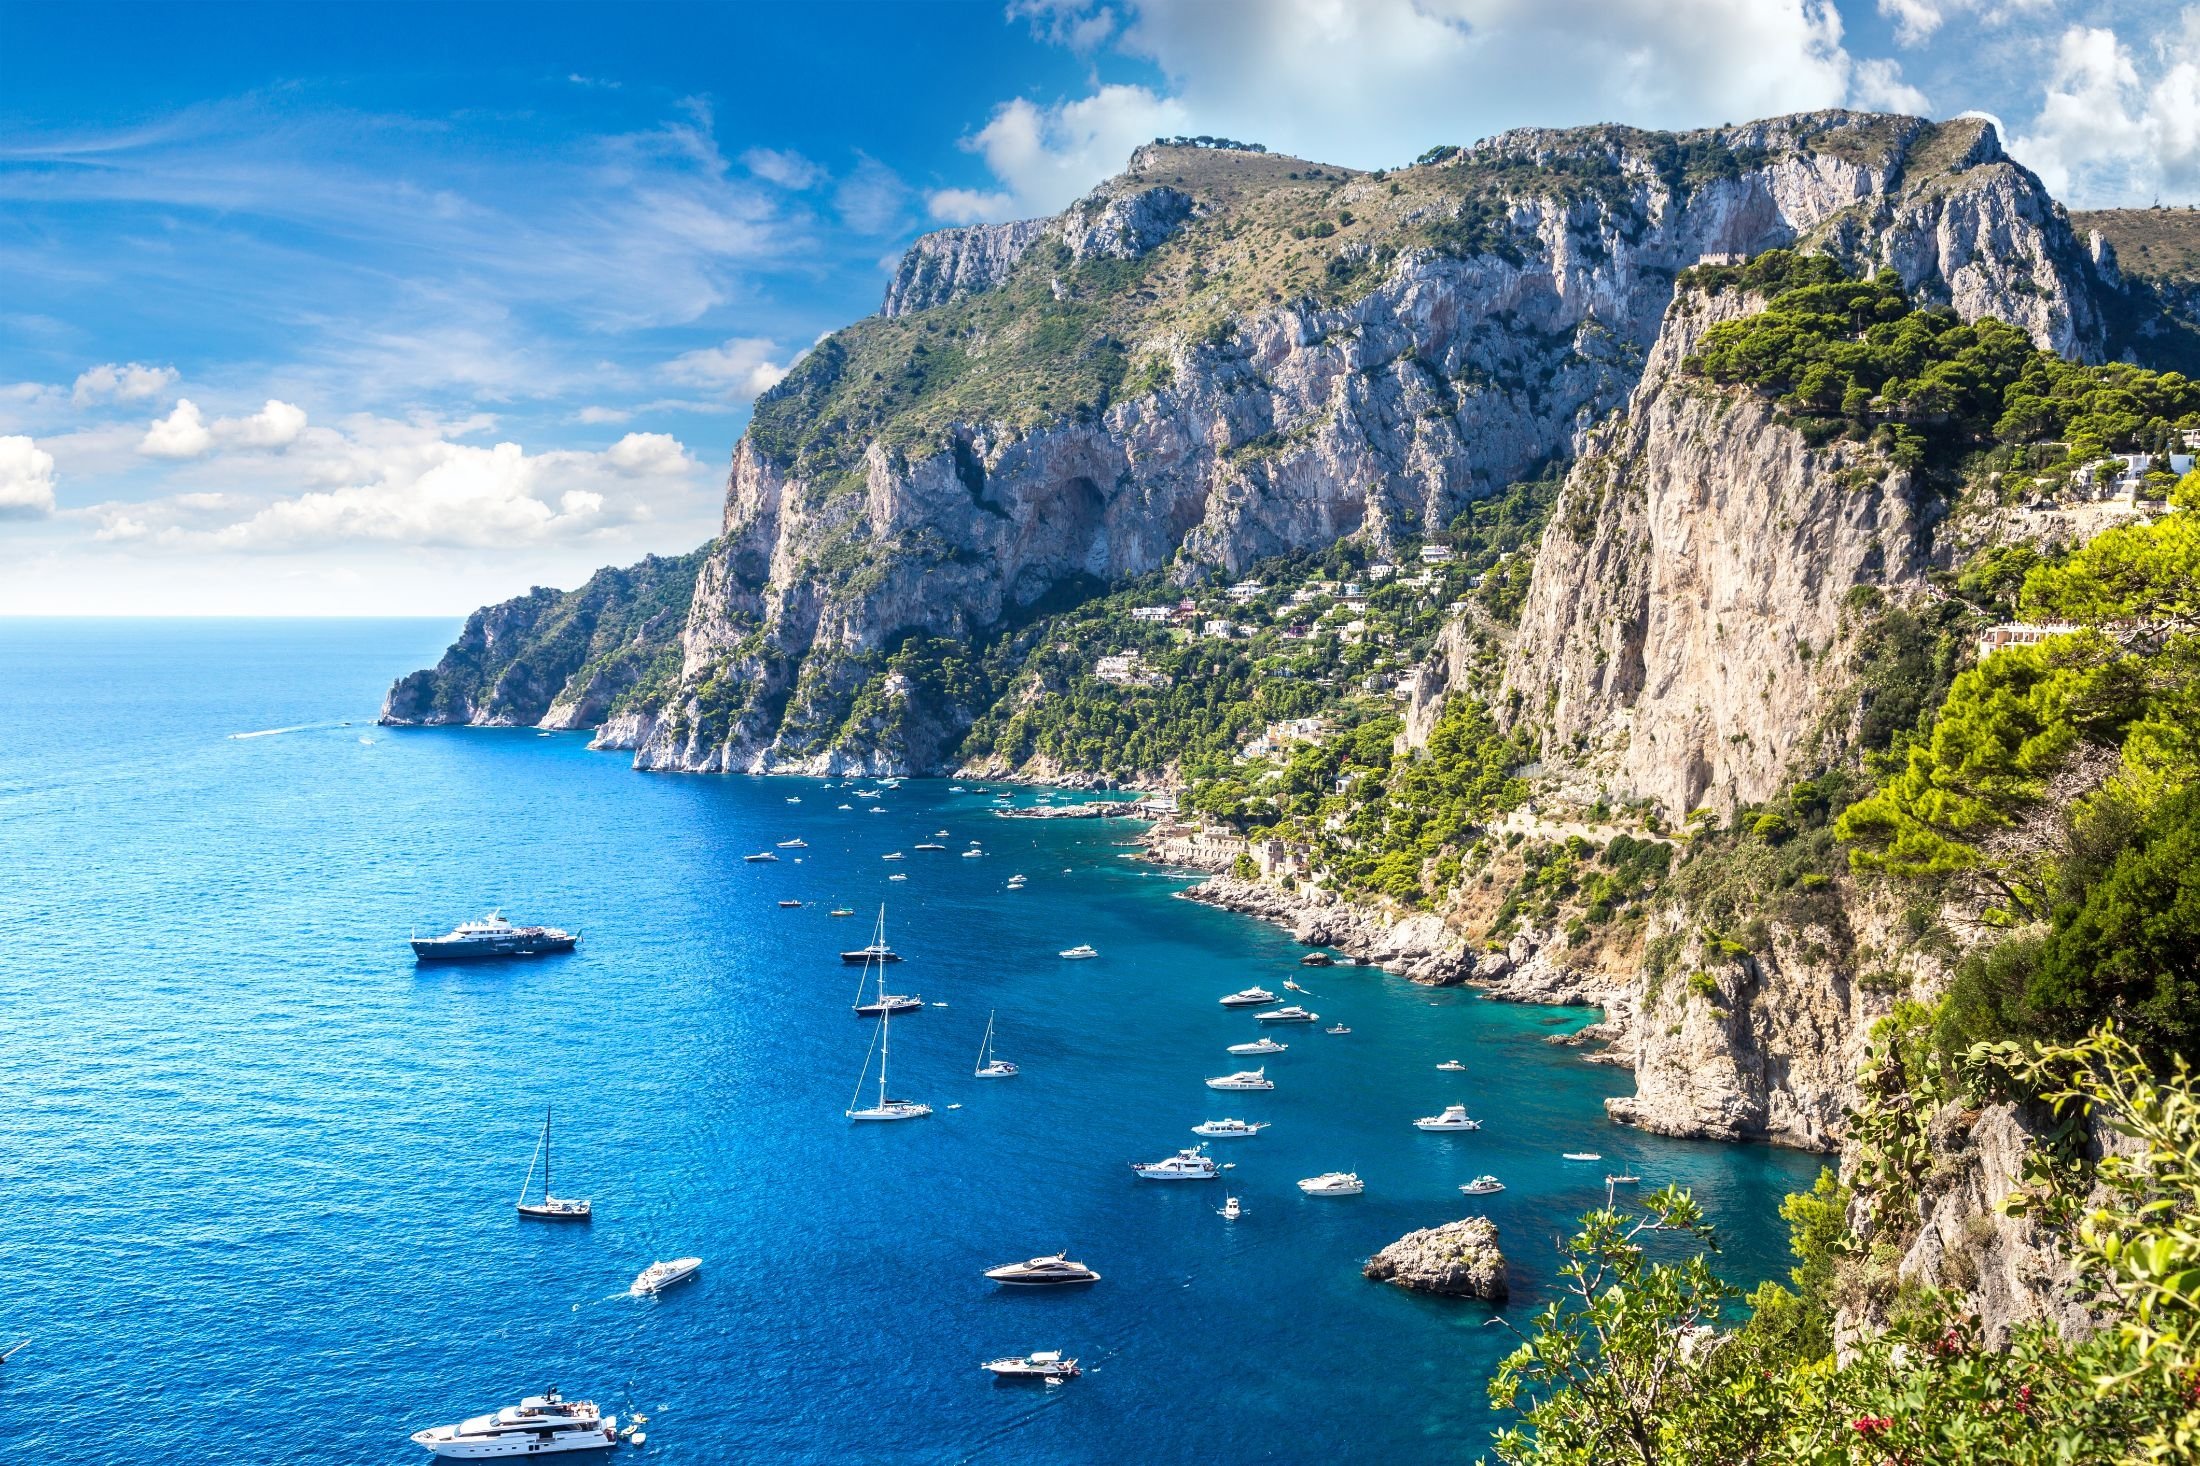 The Island of Capri: Wonderland for the eccentric, rich and famous | Daily Sabah